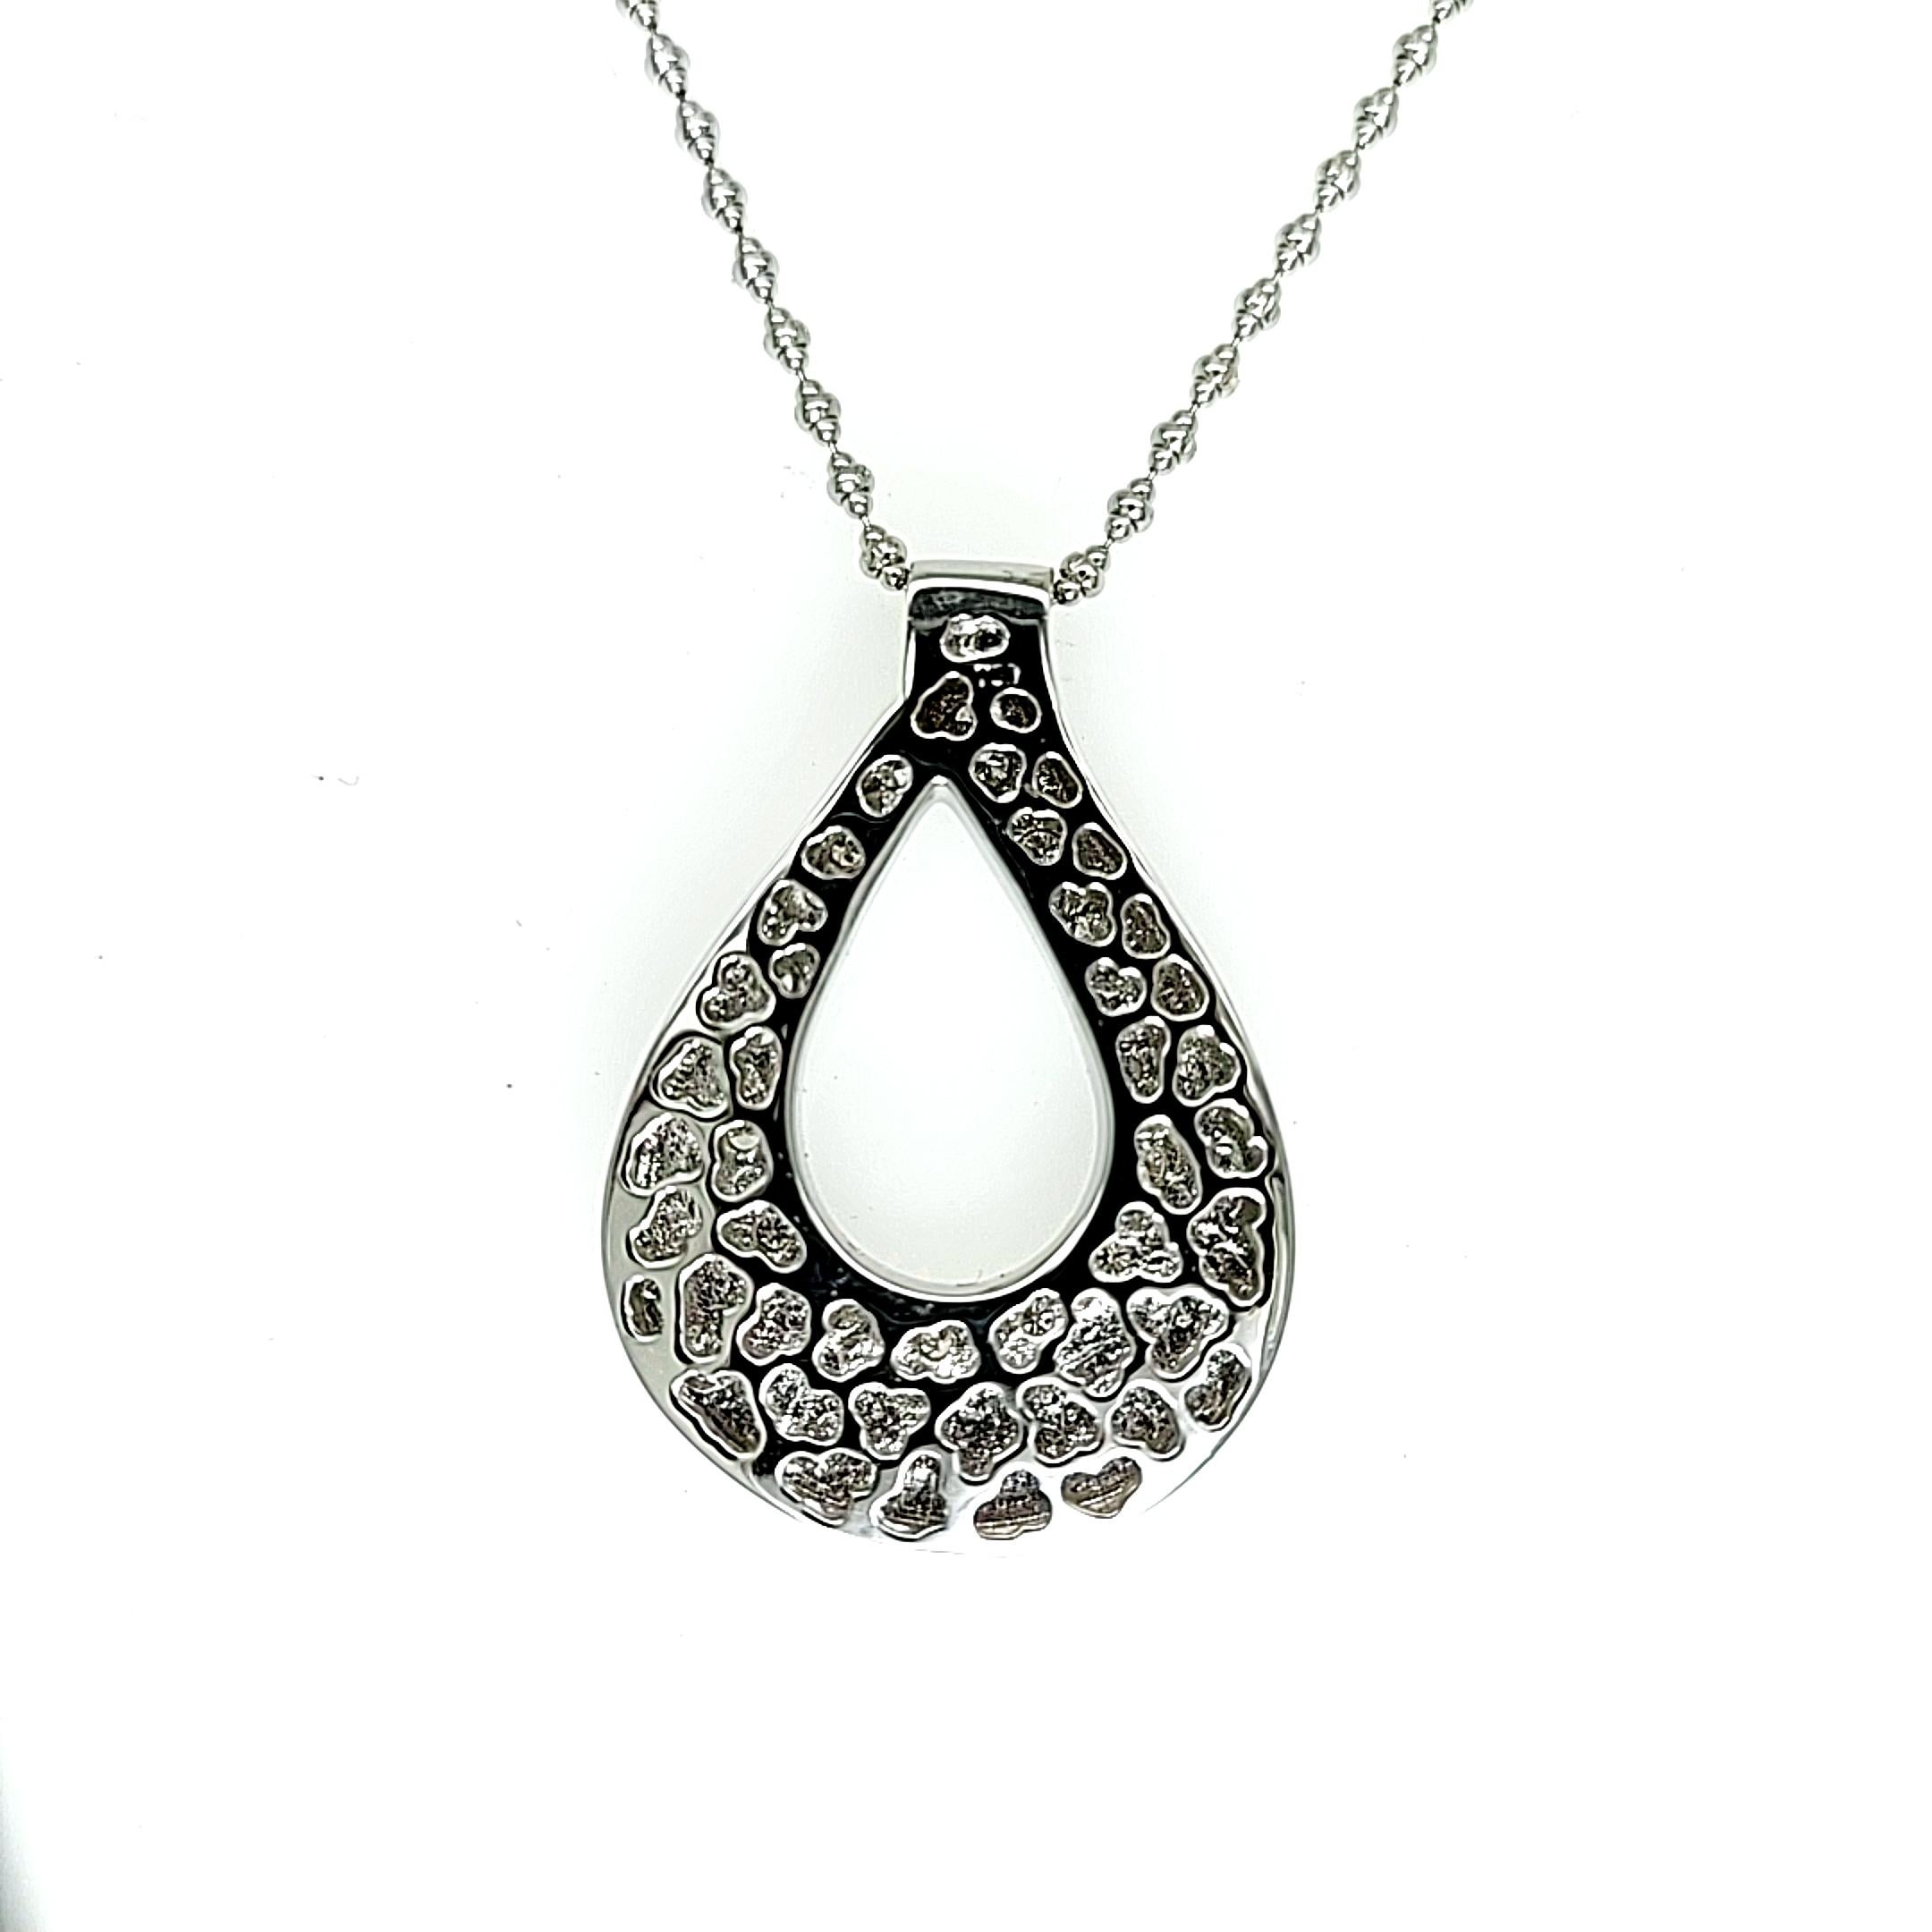 18 Karat White Gold Pear Shaped Pendant Necklace with Diamonds For Sale 2